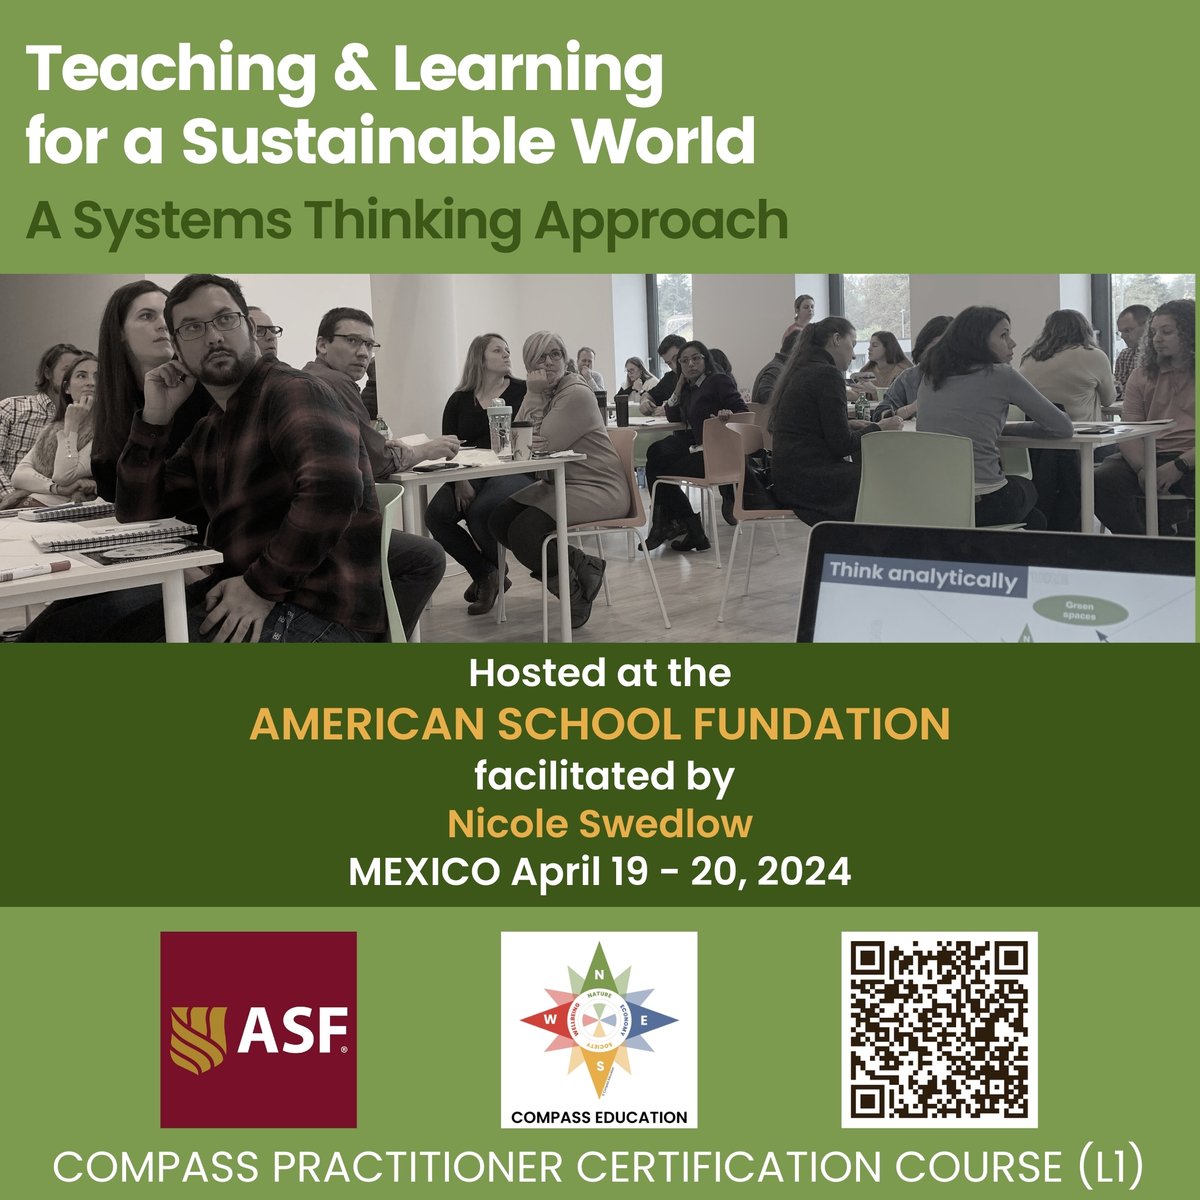 For educators and program leaders who want to integrate sustainability education and system thinking into their teaching practice! A 2-day Compass Education certification workshop that will be held on April 19-20 and delivered in English. All the info at: tinyurl.com/4t4jsr6w